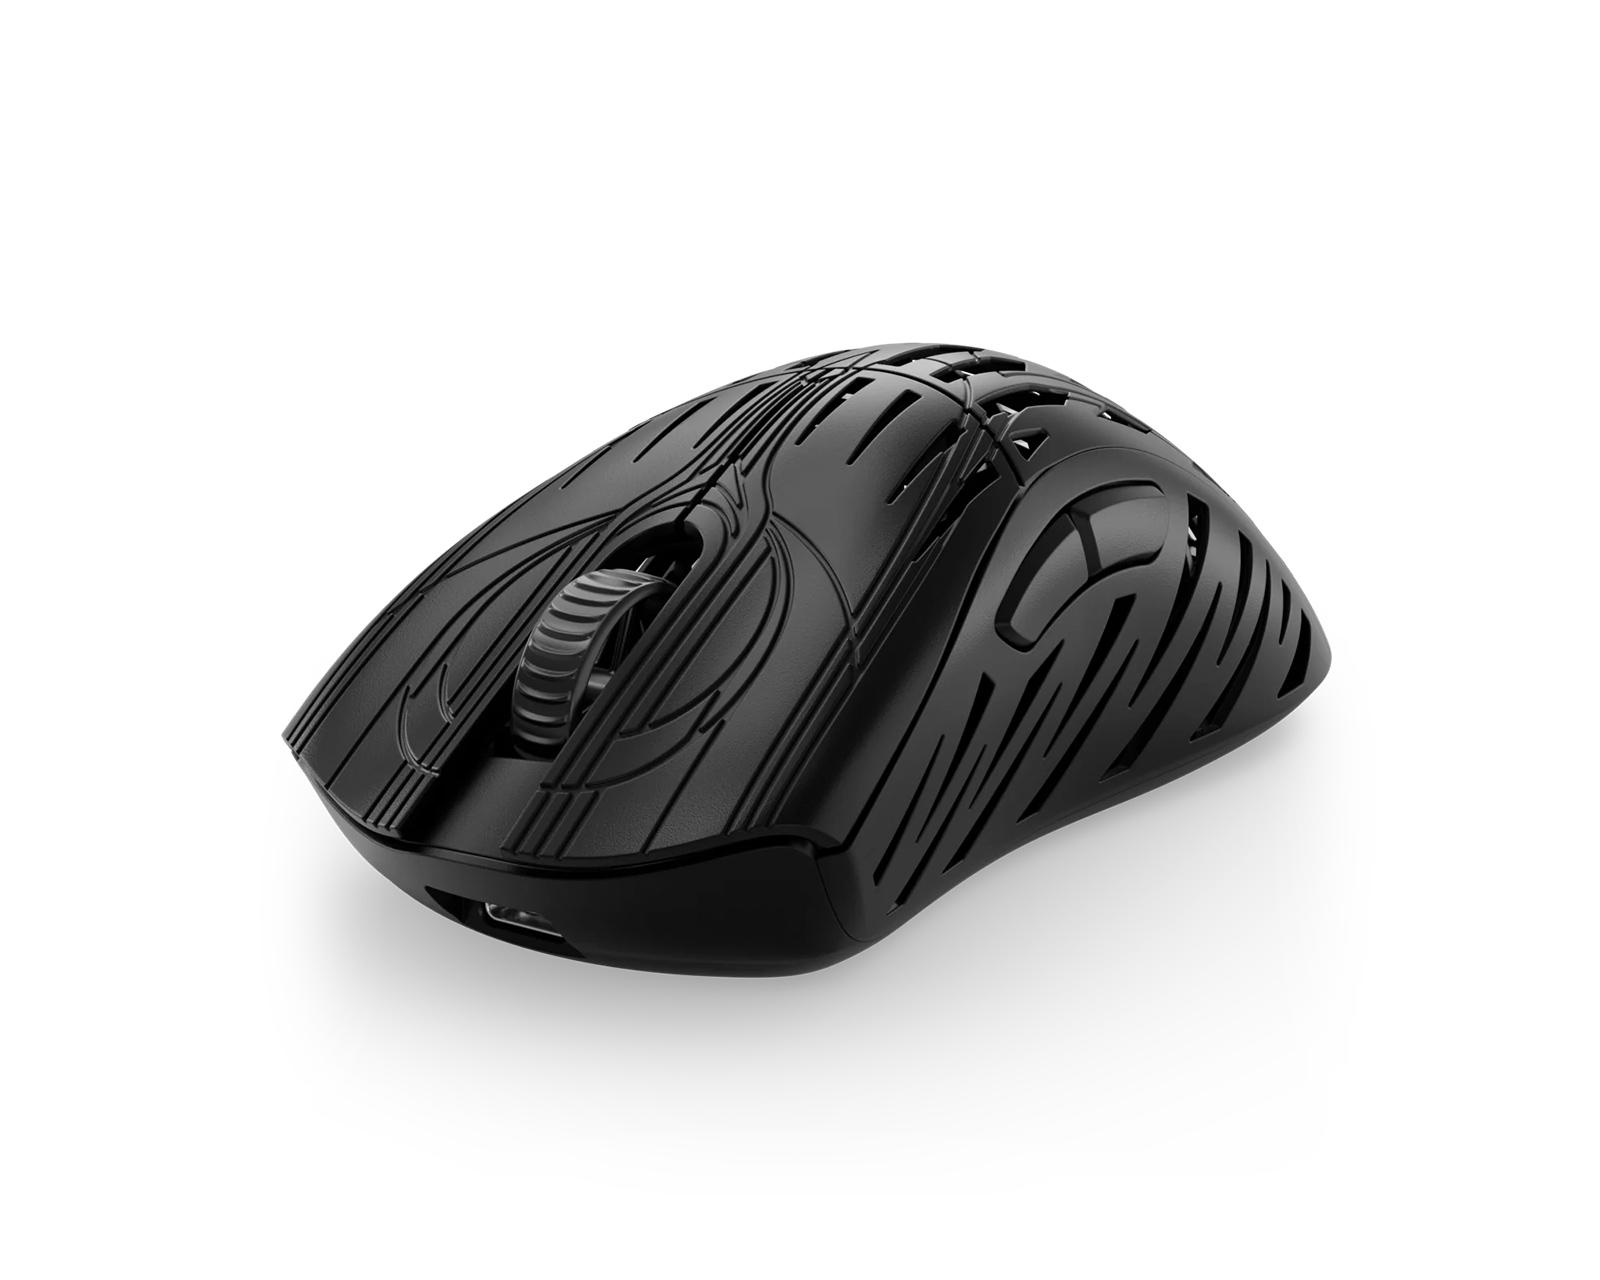 Pwnage Stormbreaker Magnesium Wireless Gaming Mouse - Black - us